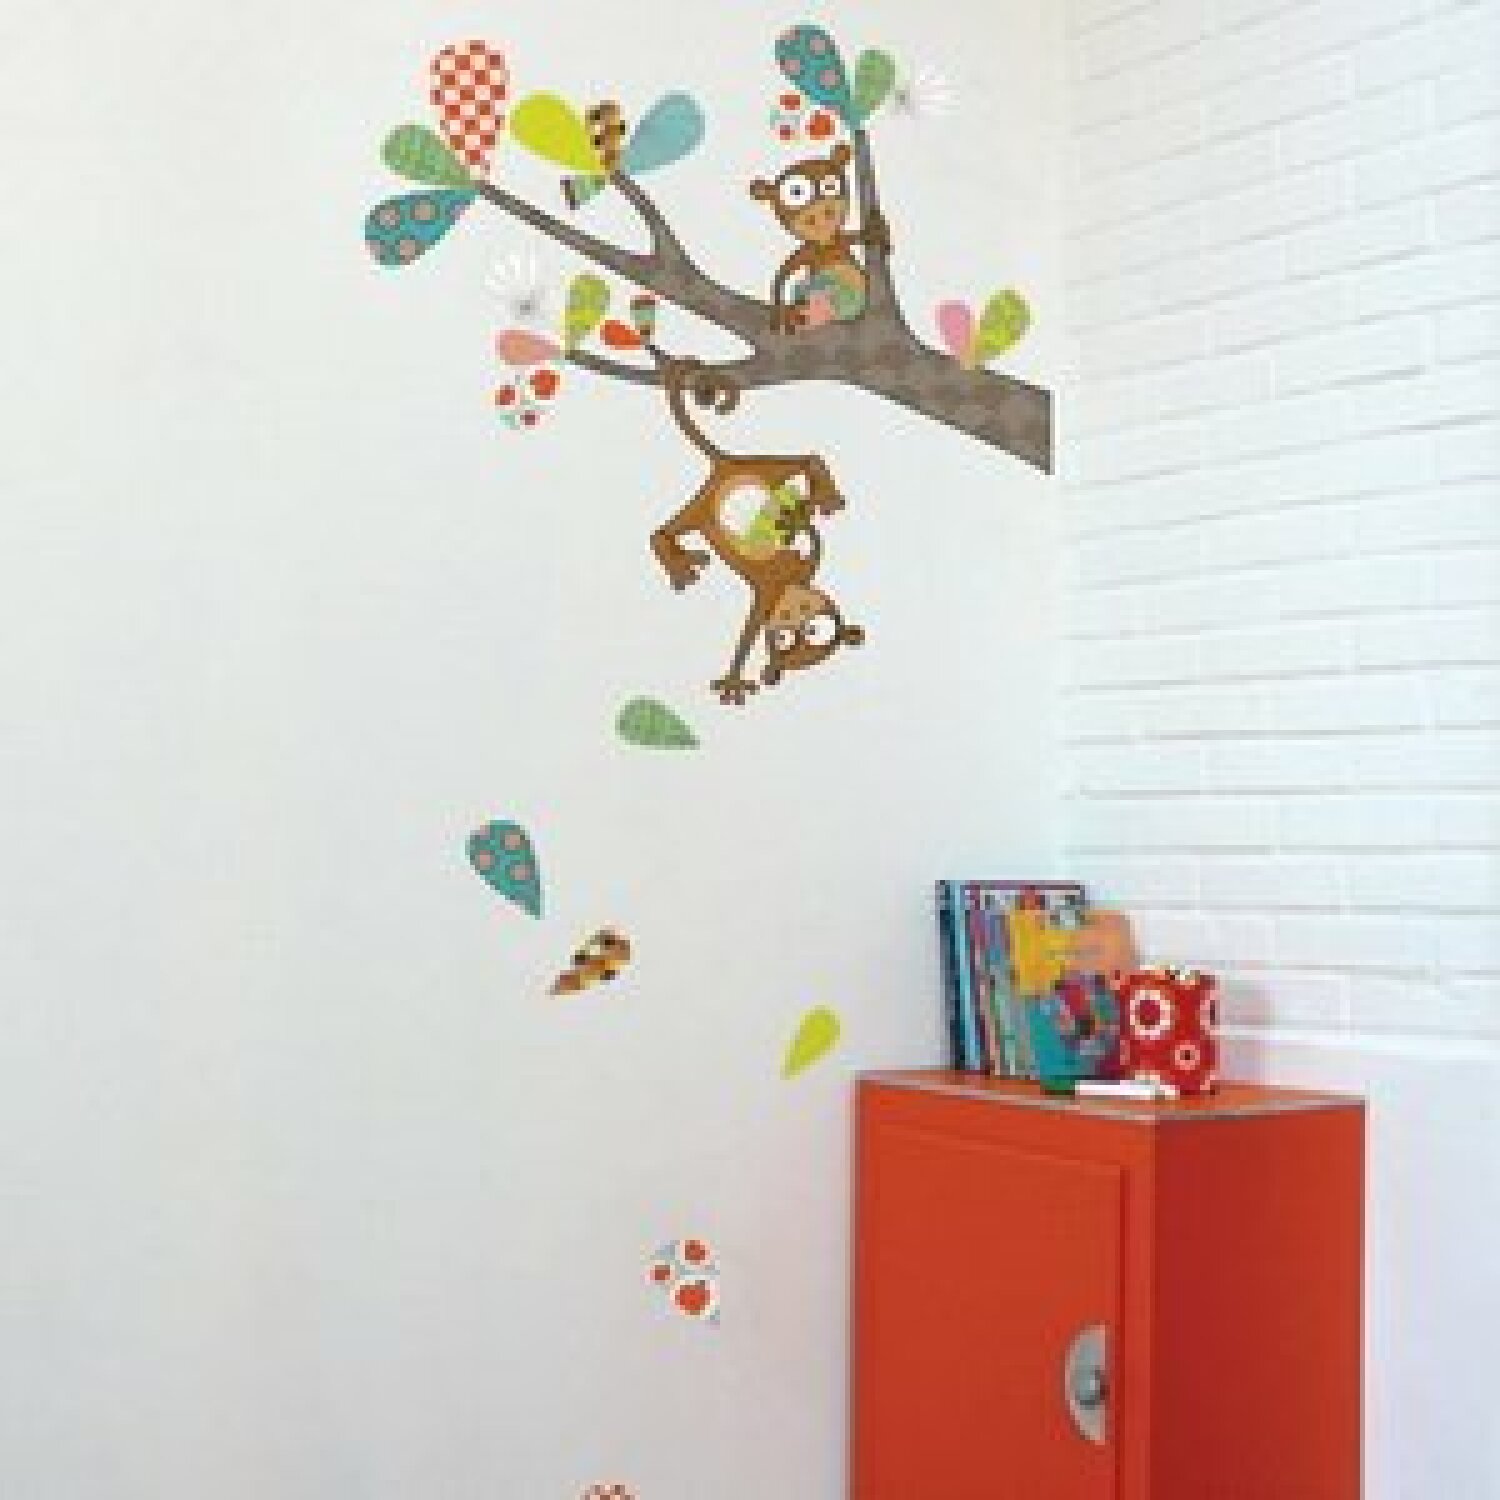 <a href="https://www.moderndigz.com/ADZif wall decals" target="_blank" rel="noopener nofollow noreferrer">Bright and cheery</a>